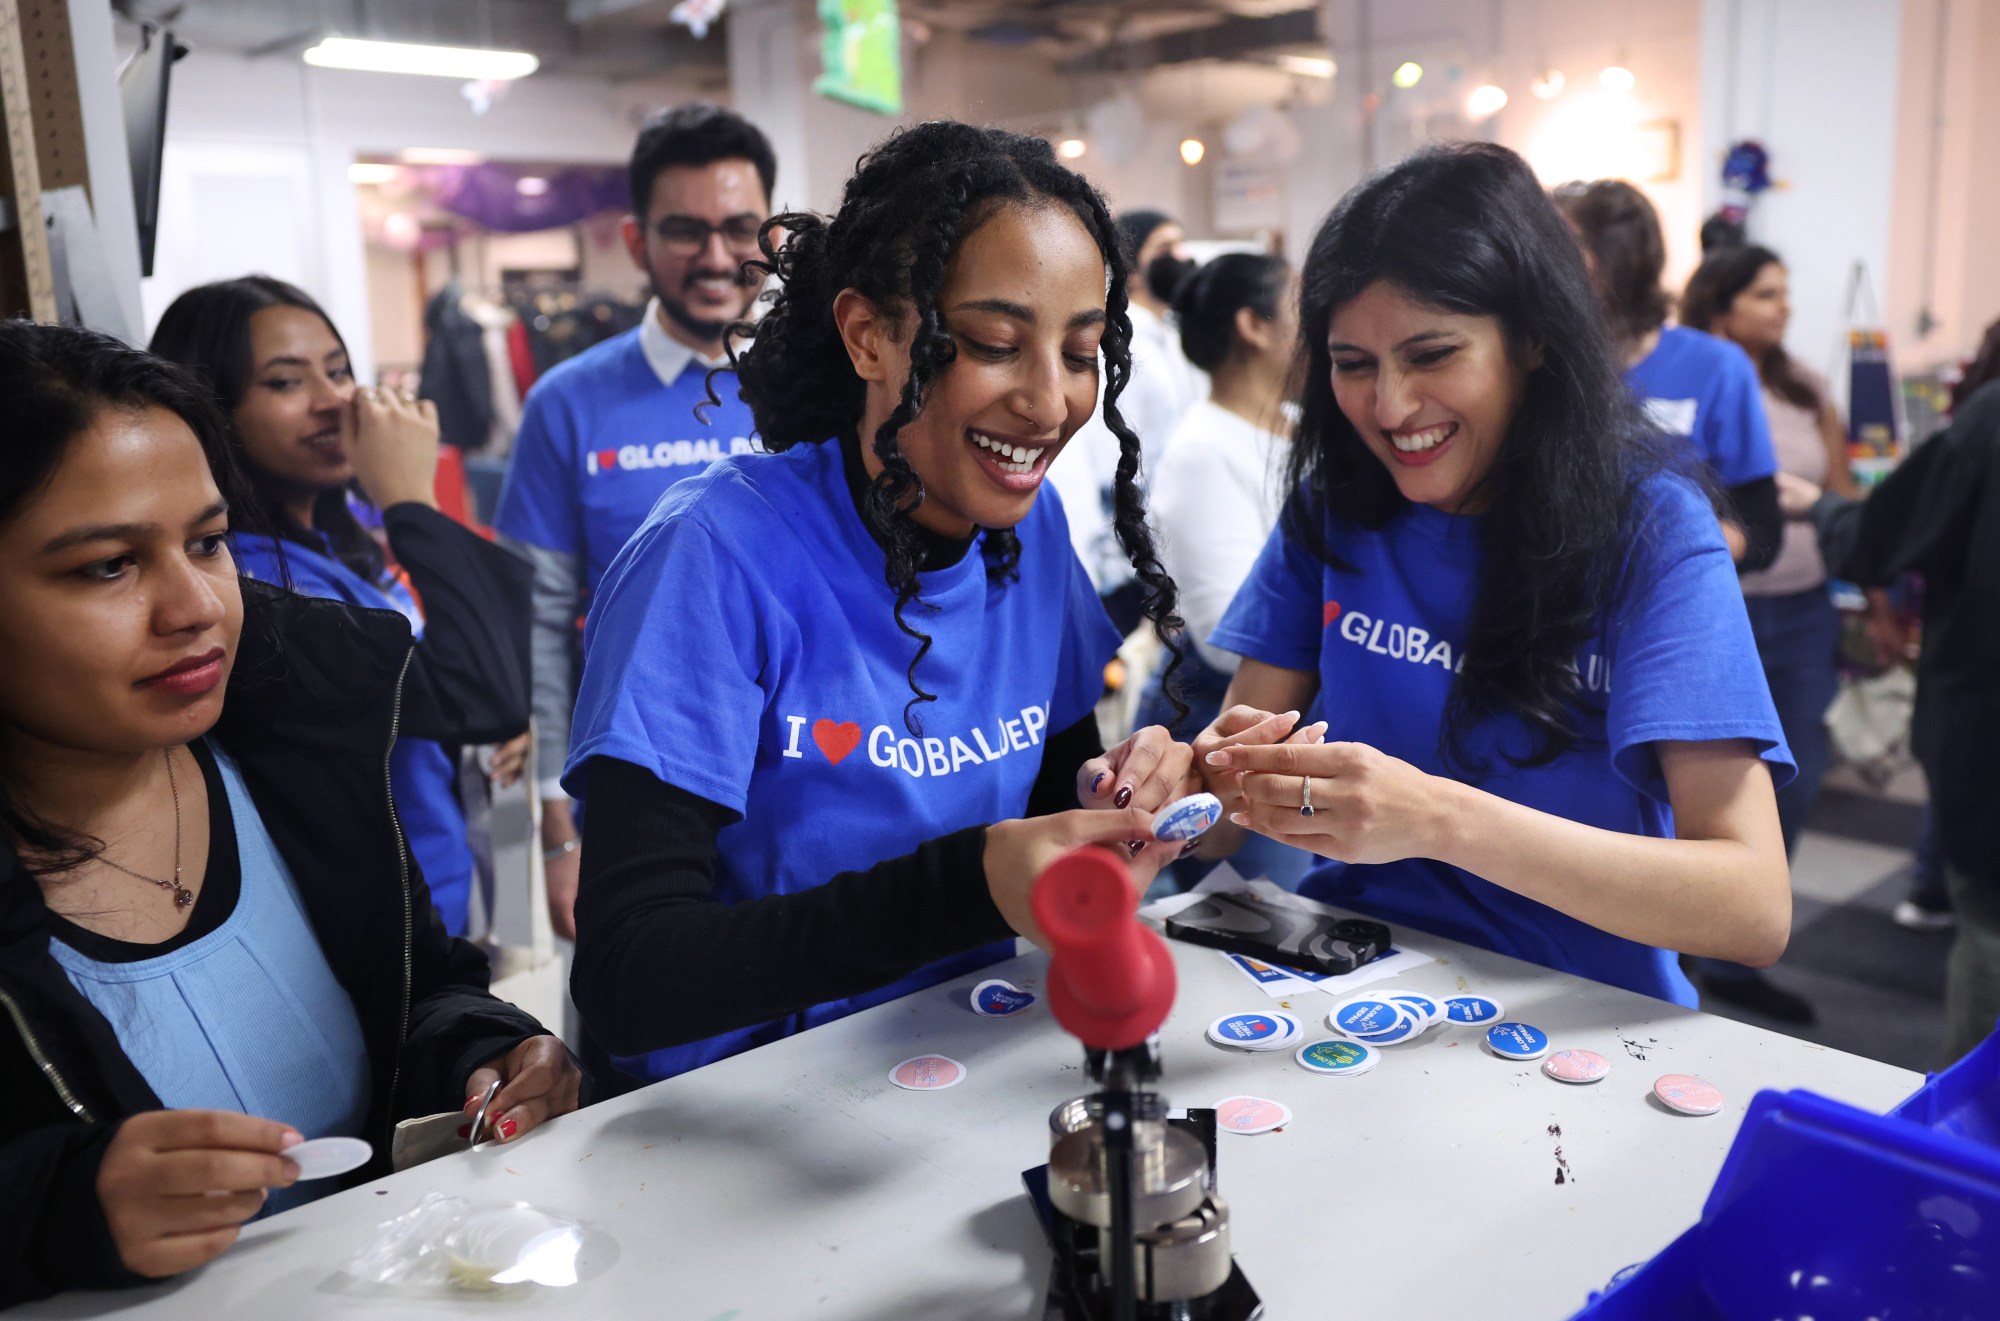 DePaul University students Beemnet Desta, center, and Suchita Farkiwala, right, laugh while making pins at a social gathering for international students at the school's downtown campus on Jan. 26, 2024. (Chris Sweda/Chicago Tribune)